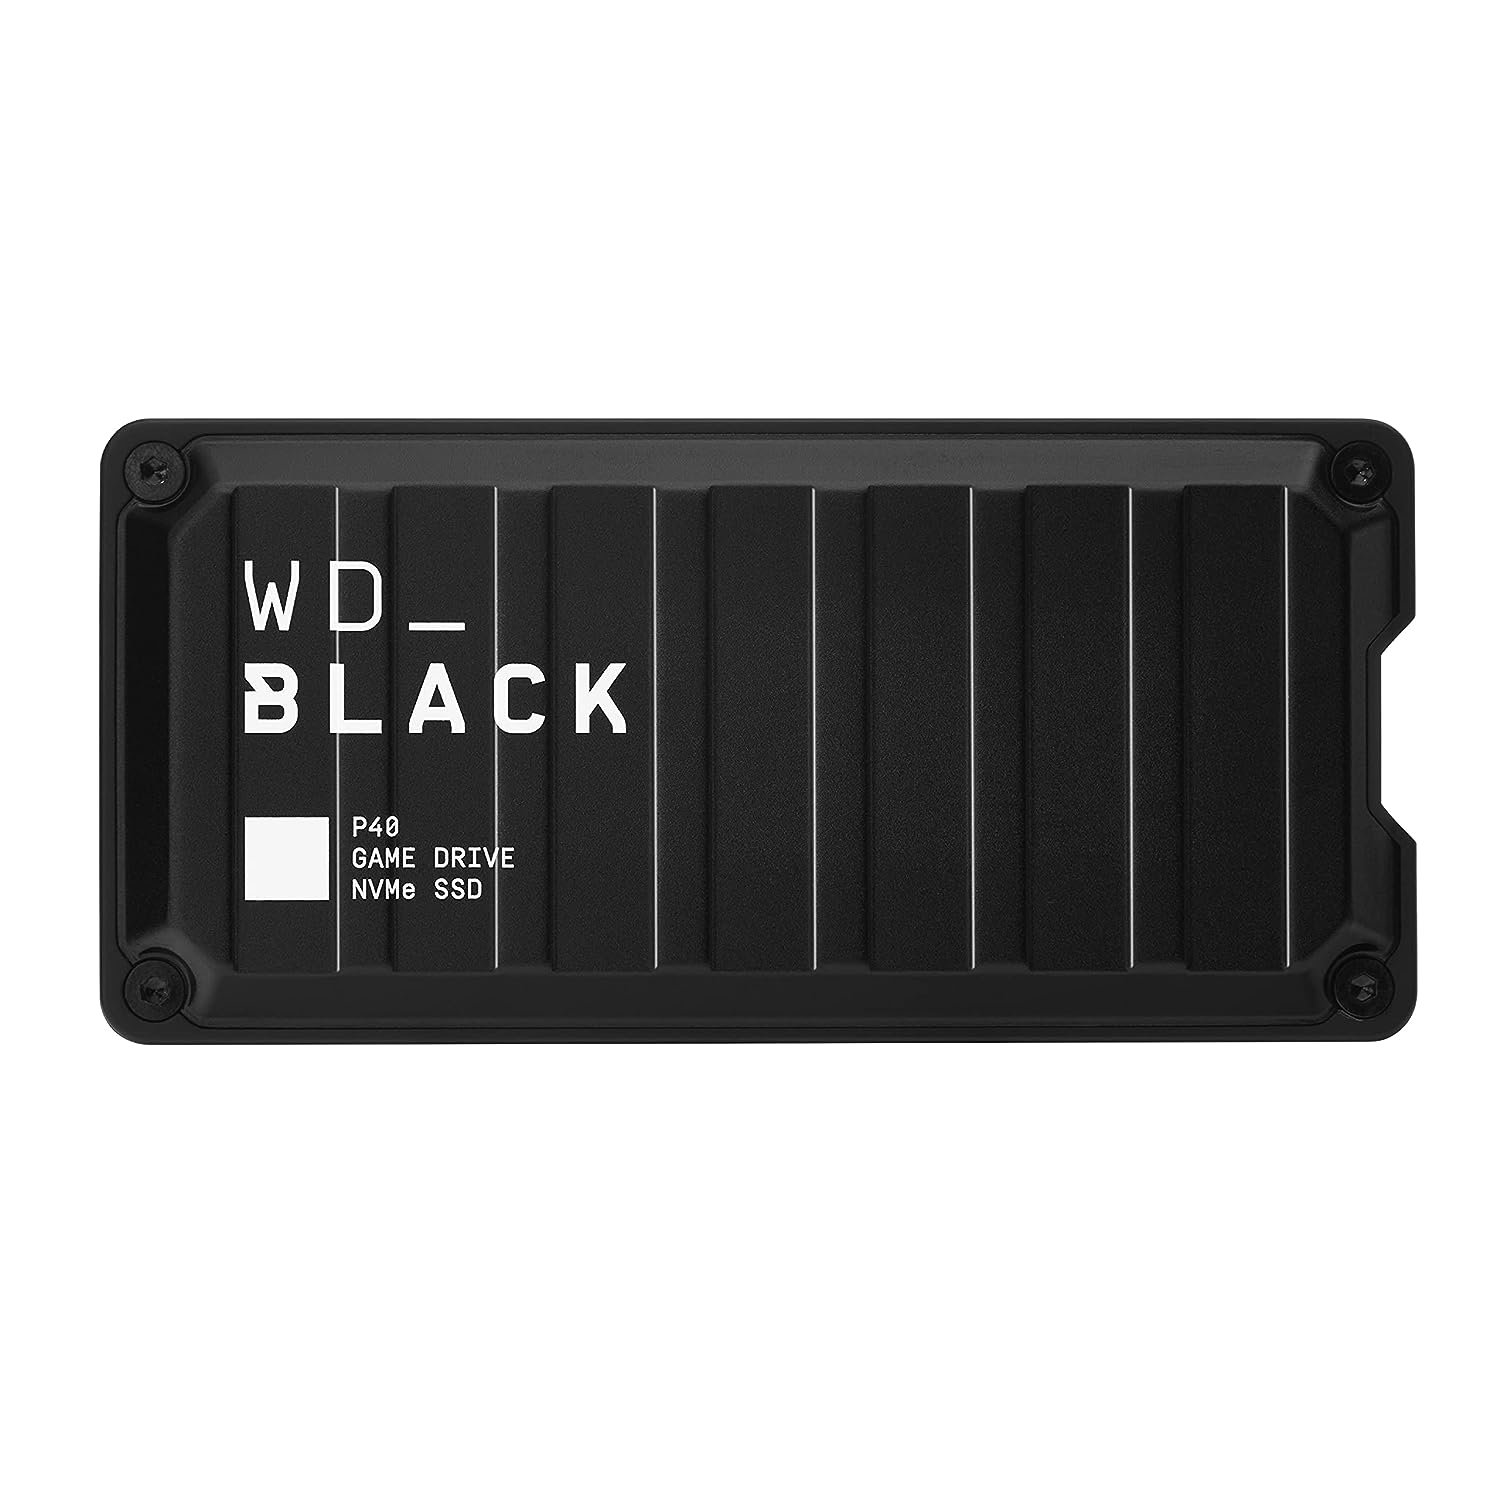 Top SSDs and HDDs from WD_BLACK which will help enhance your gaming experience